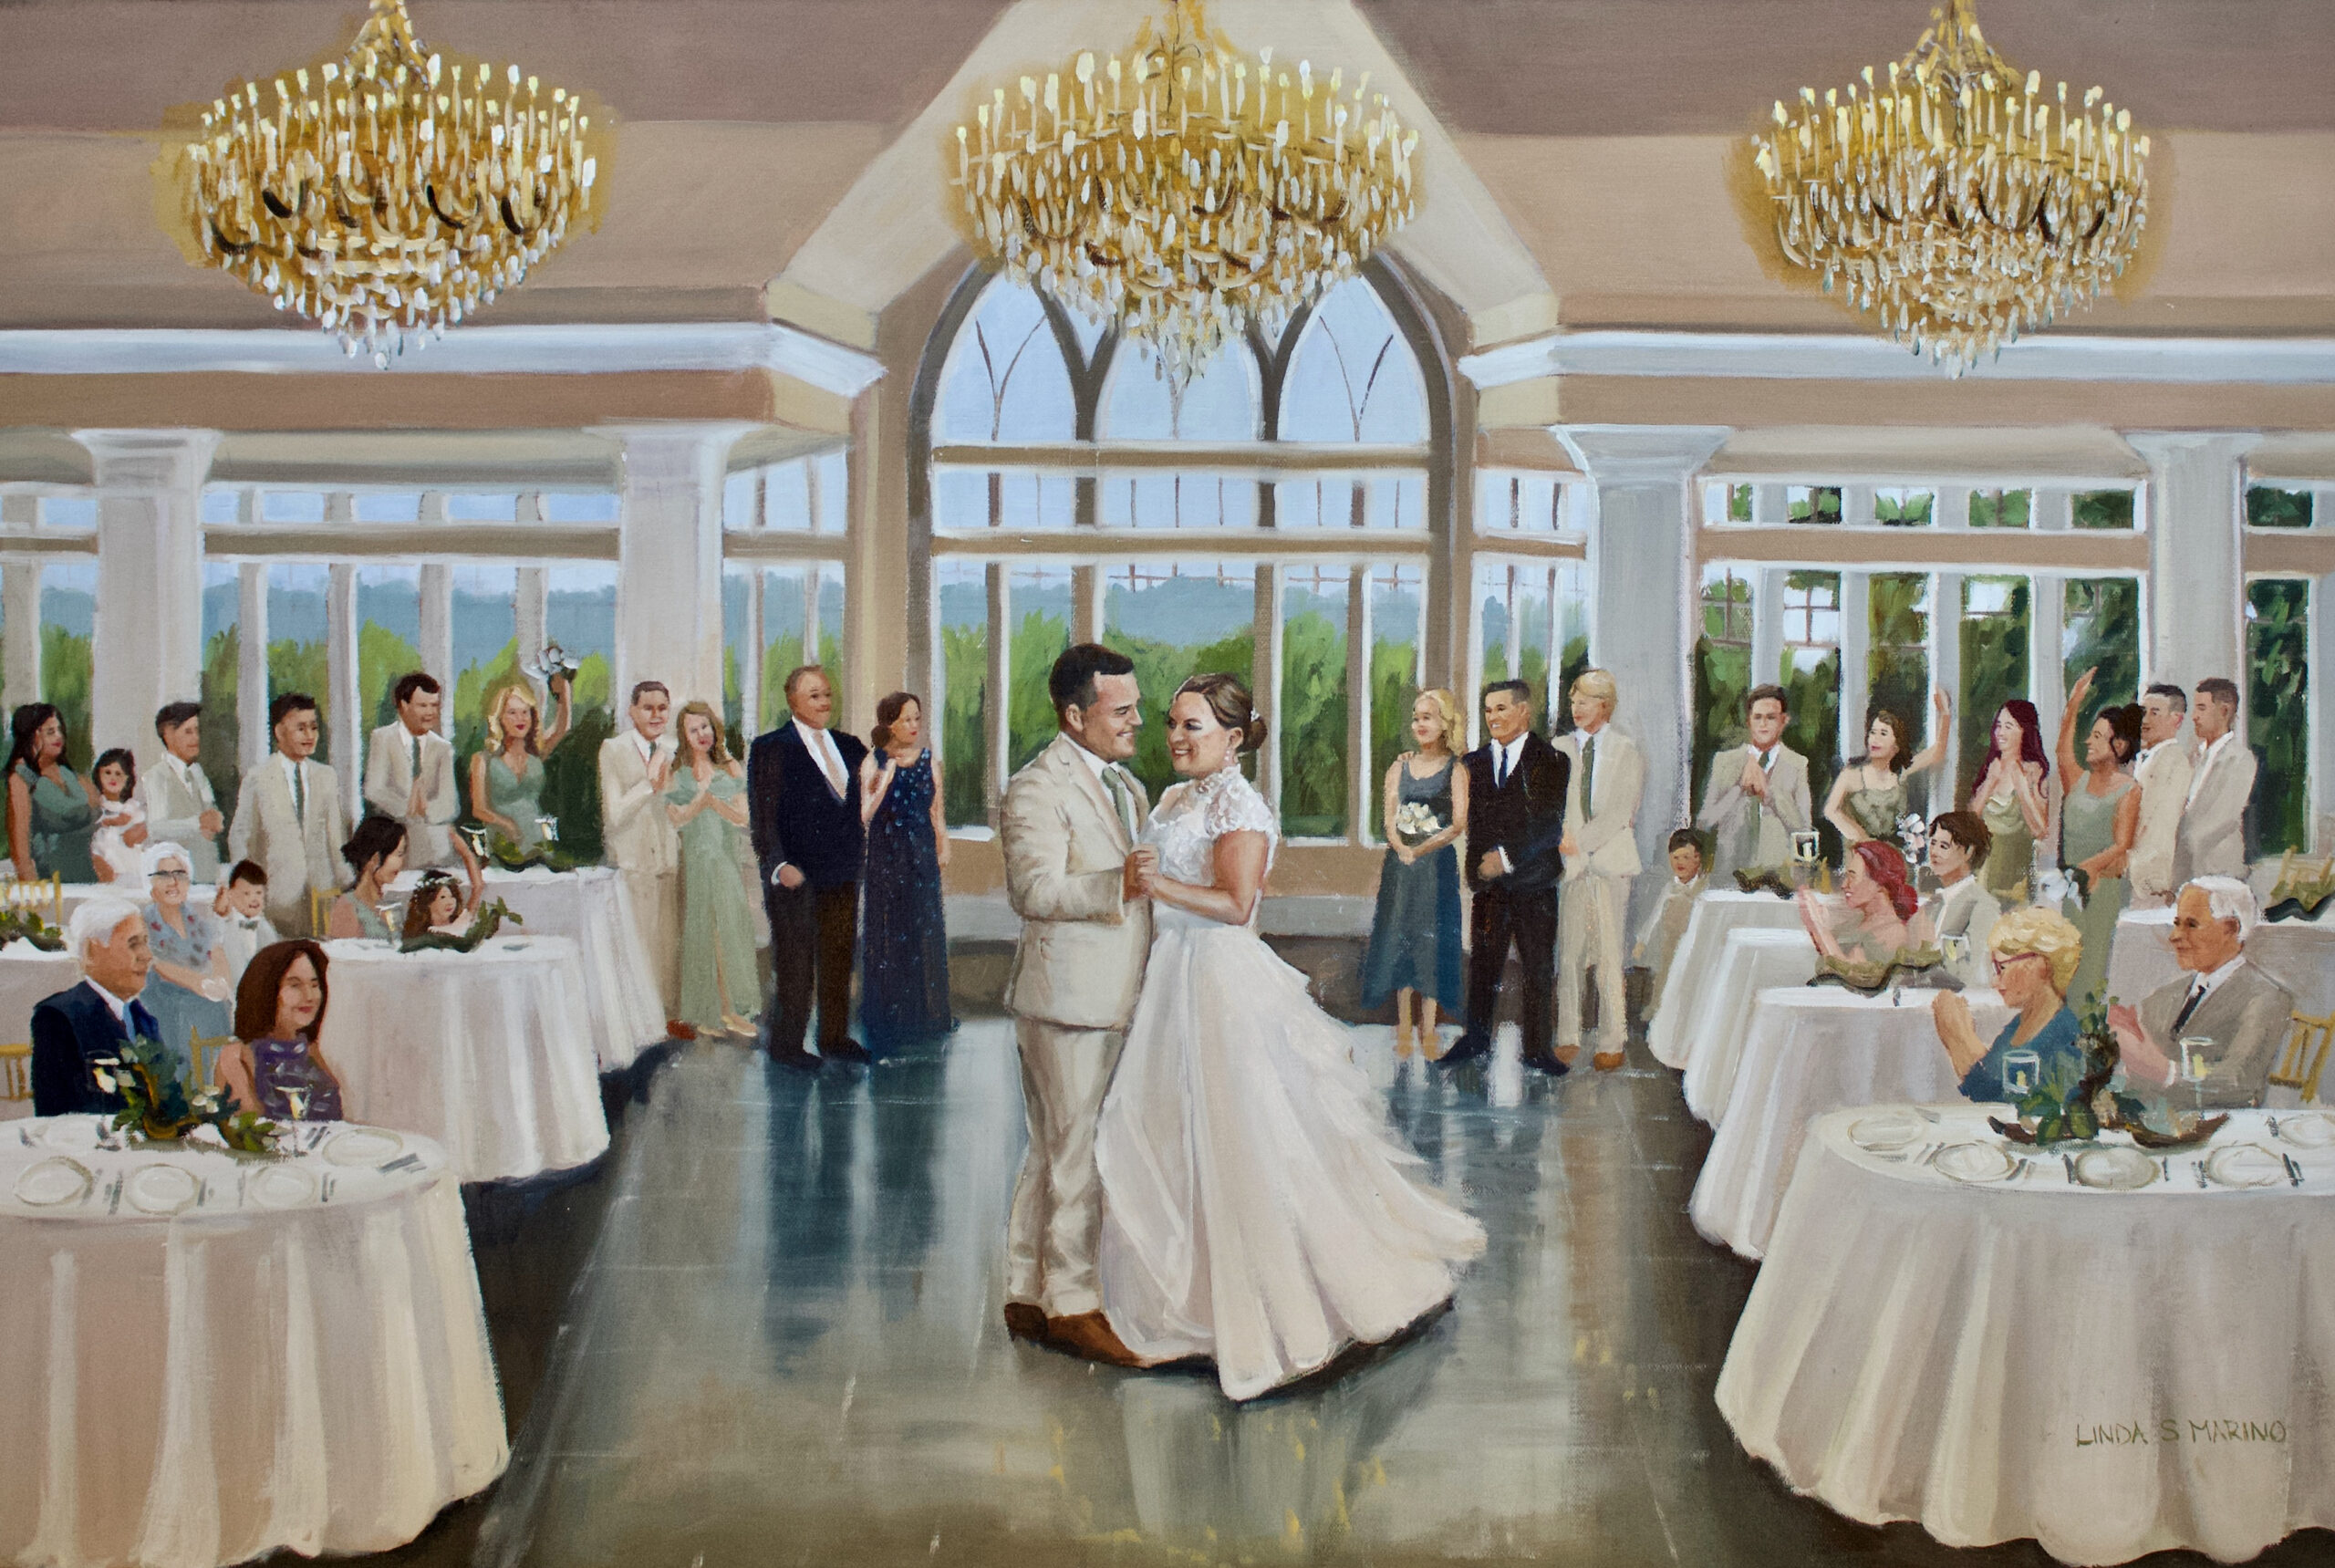 live wedding painting of Bride and Groom's first dance at Le Chateau in South Salem NY, painted by Linda Marino